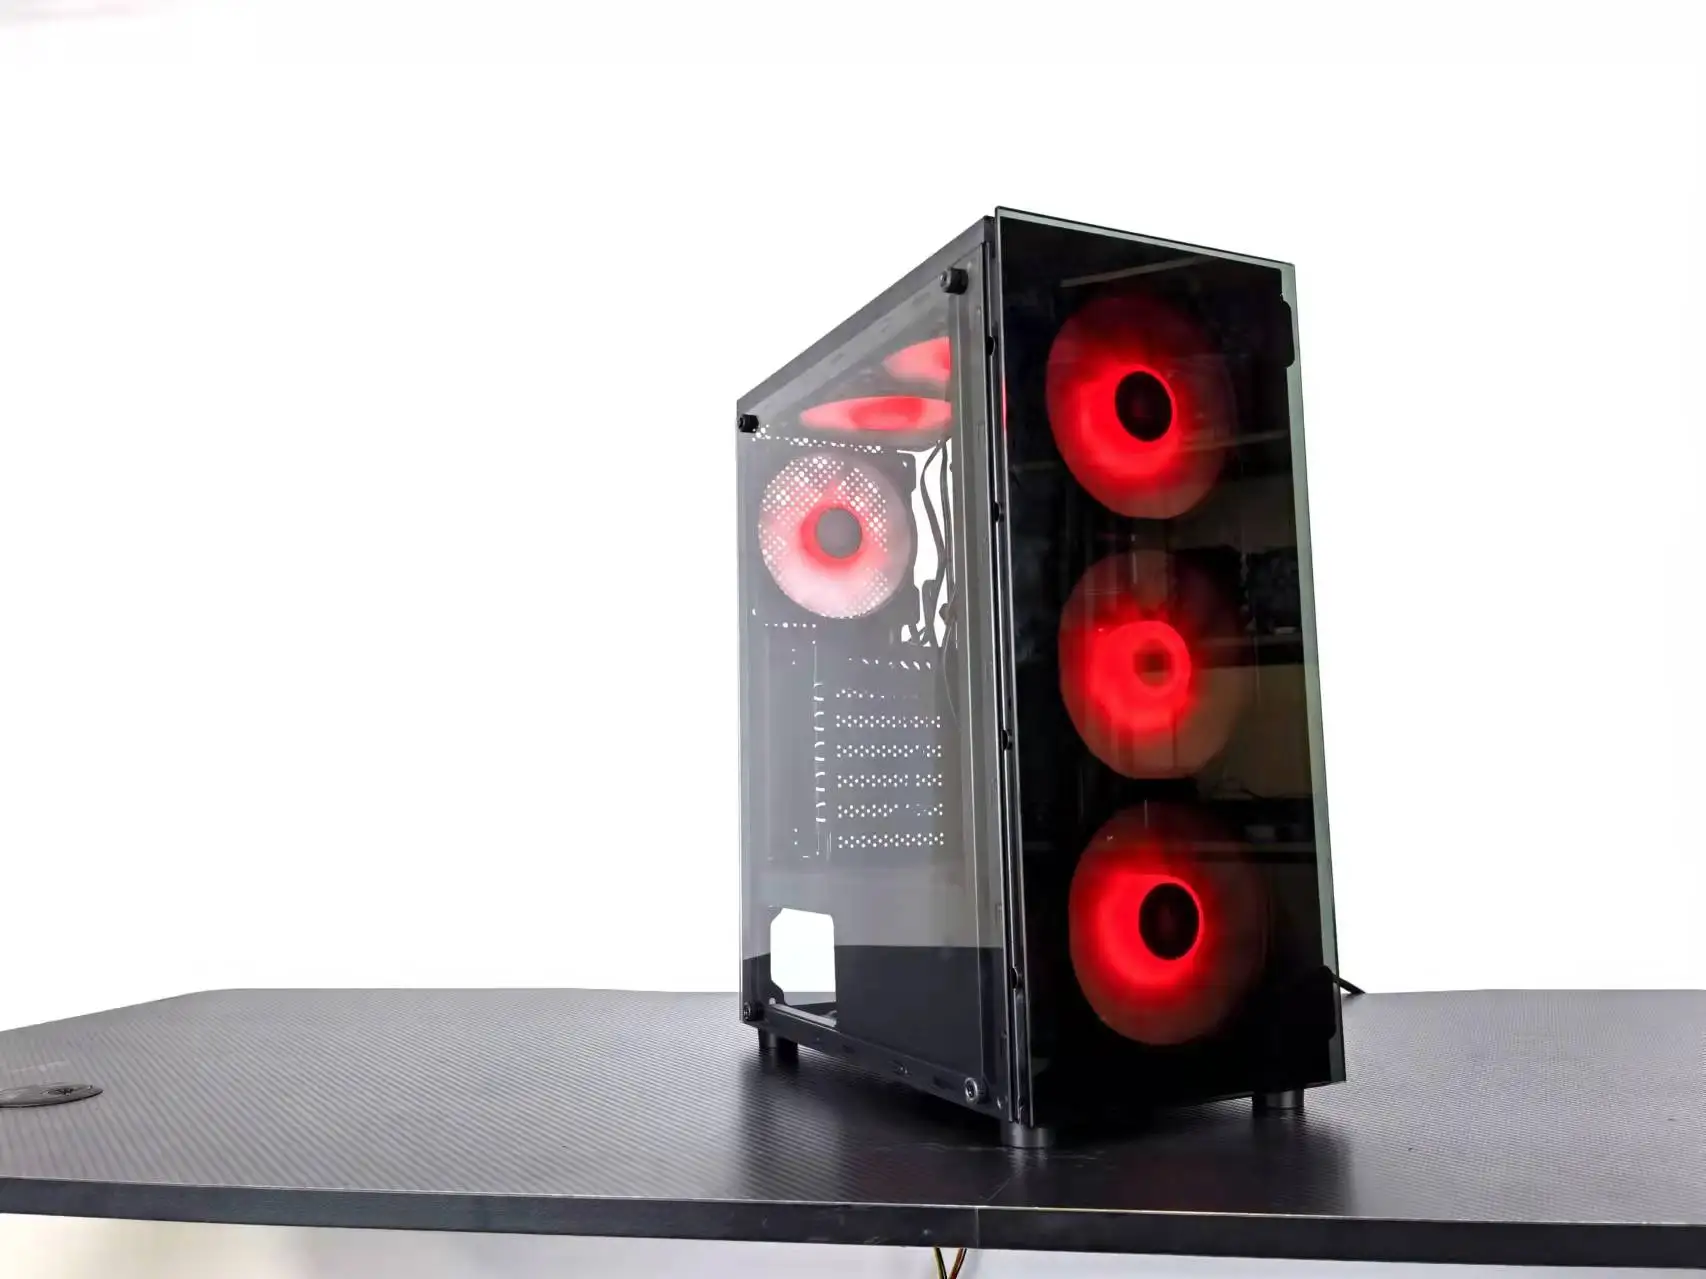 Source SATE- Hot Selling OEM factory Computer Parts And Accessories Economical New Atx Desktop Pc Case 1600K on m.alibaba.com